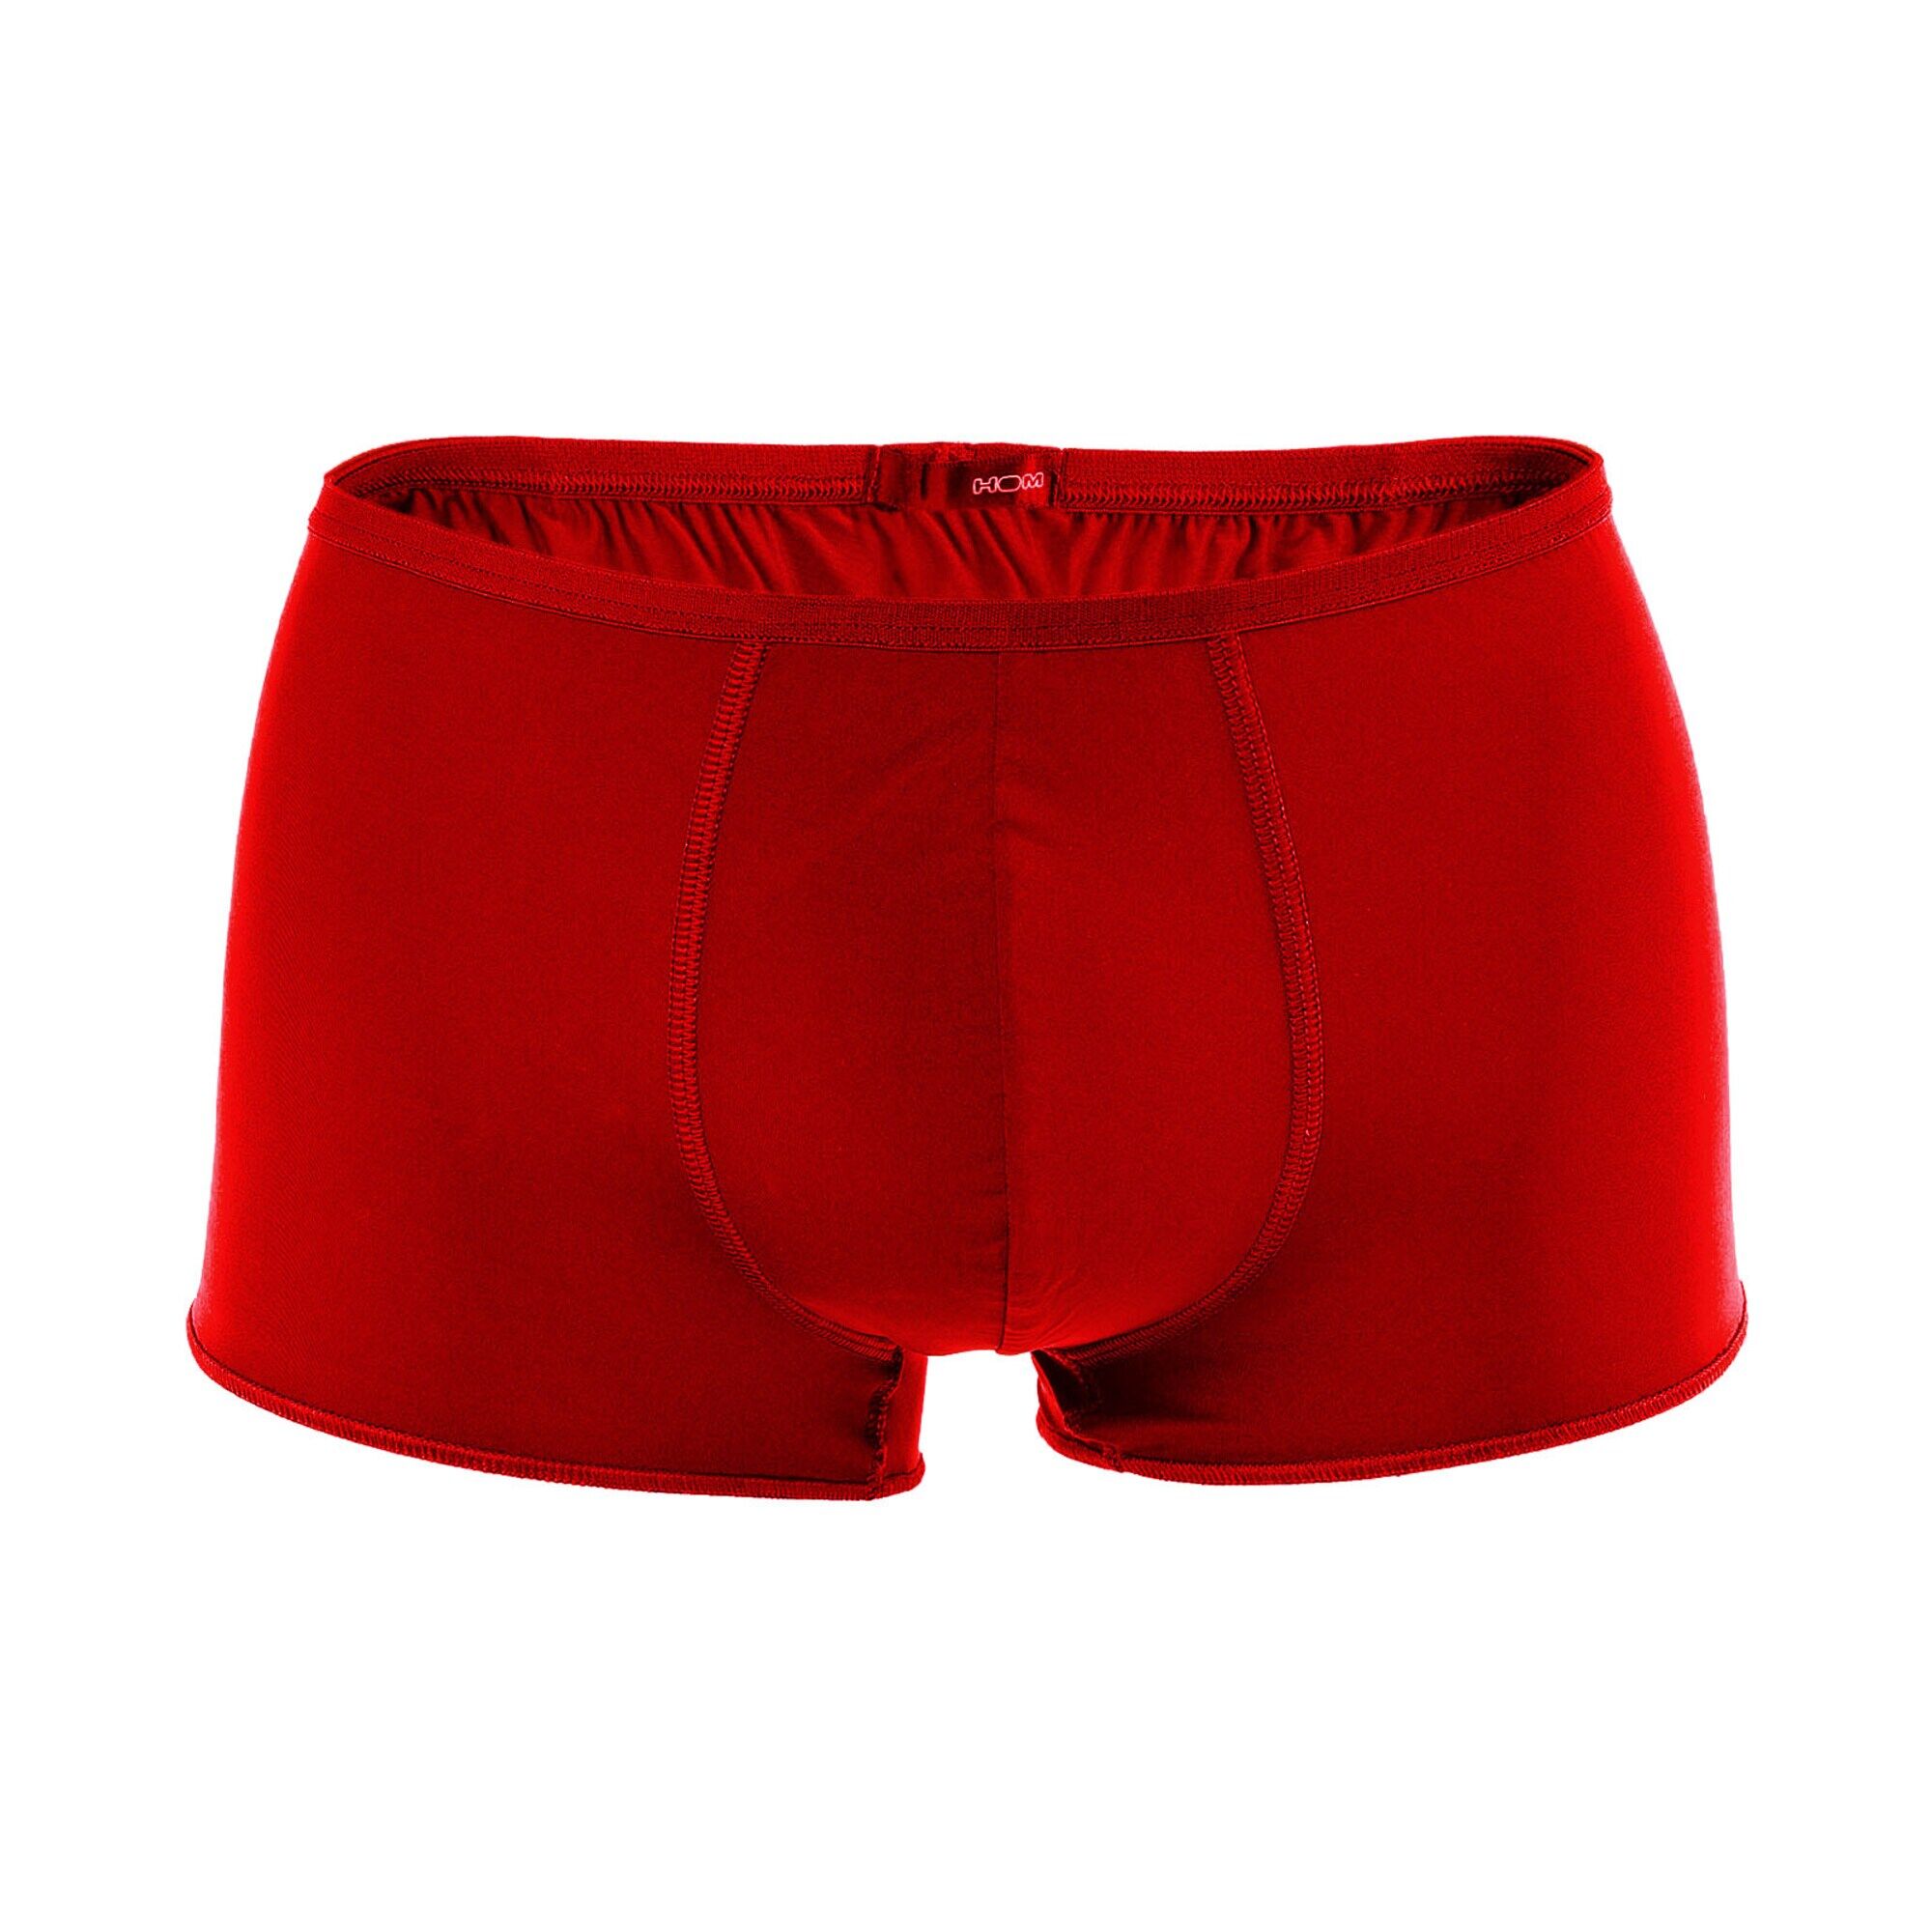 HOM Boxers 'Plumes'  - Rouge - Taille: M - male